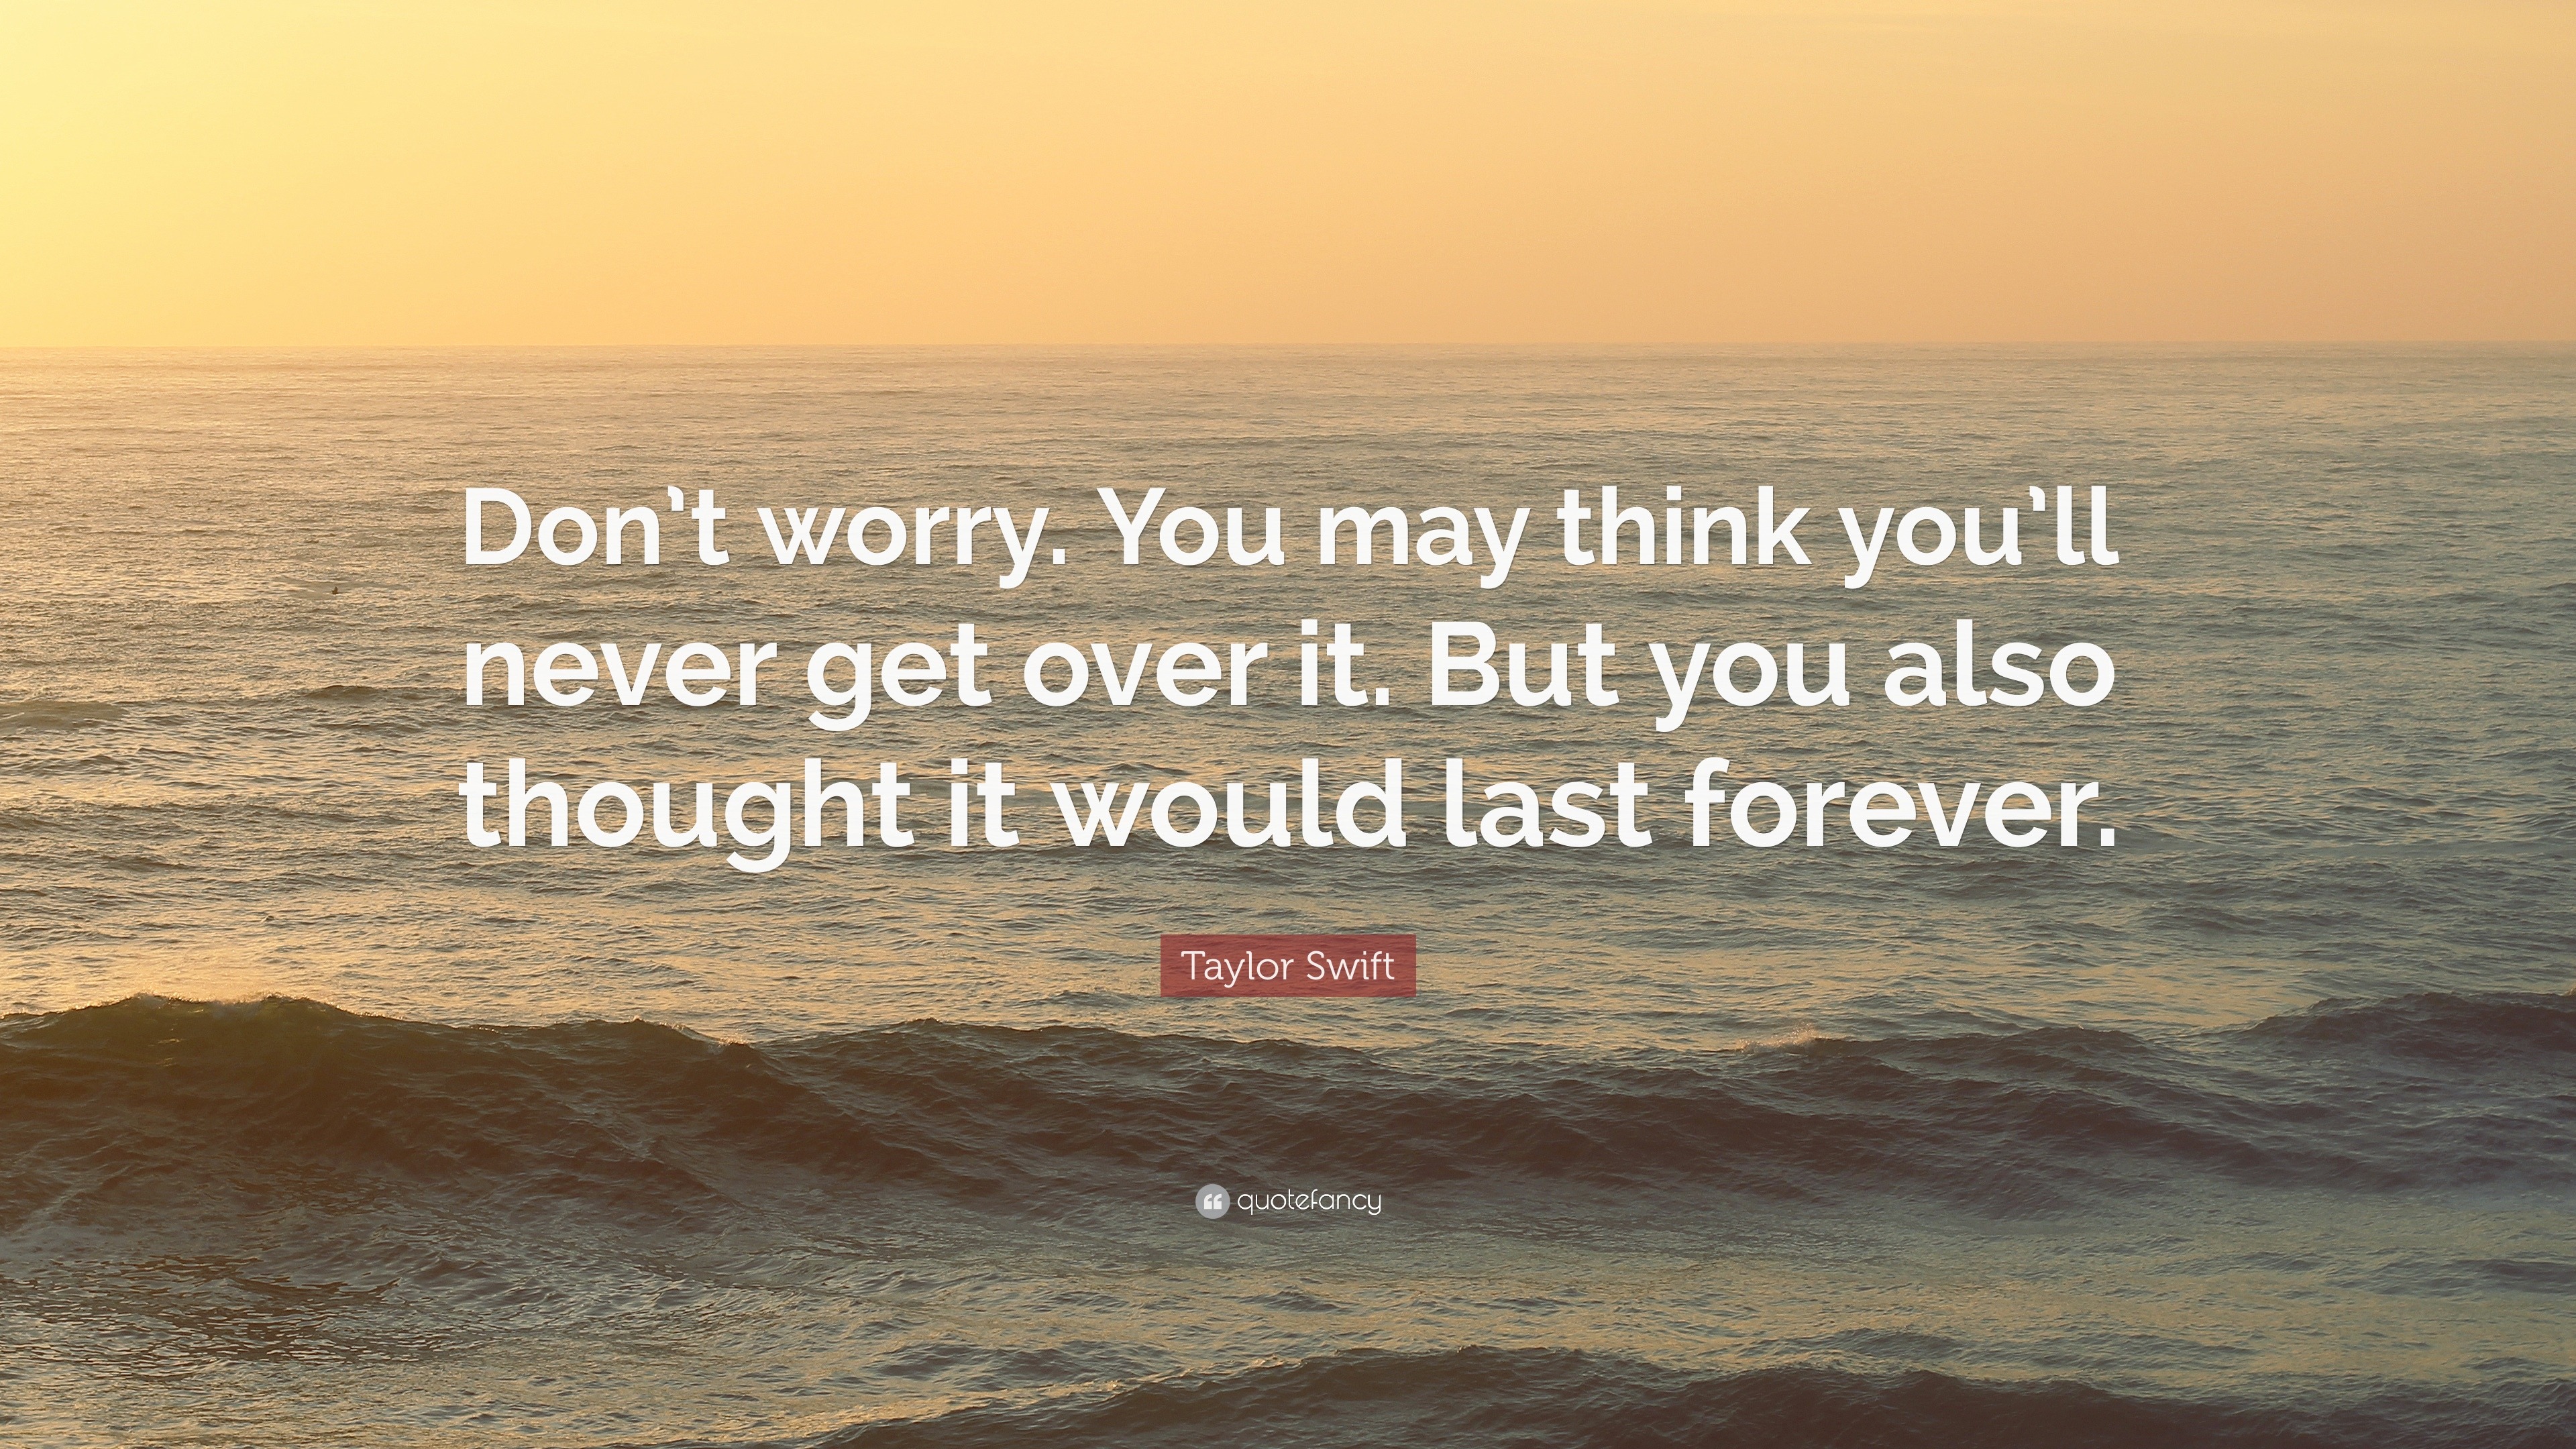 Taylor Swift Quote: “Don’t worry. You may think you’ll never get over ...